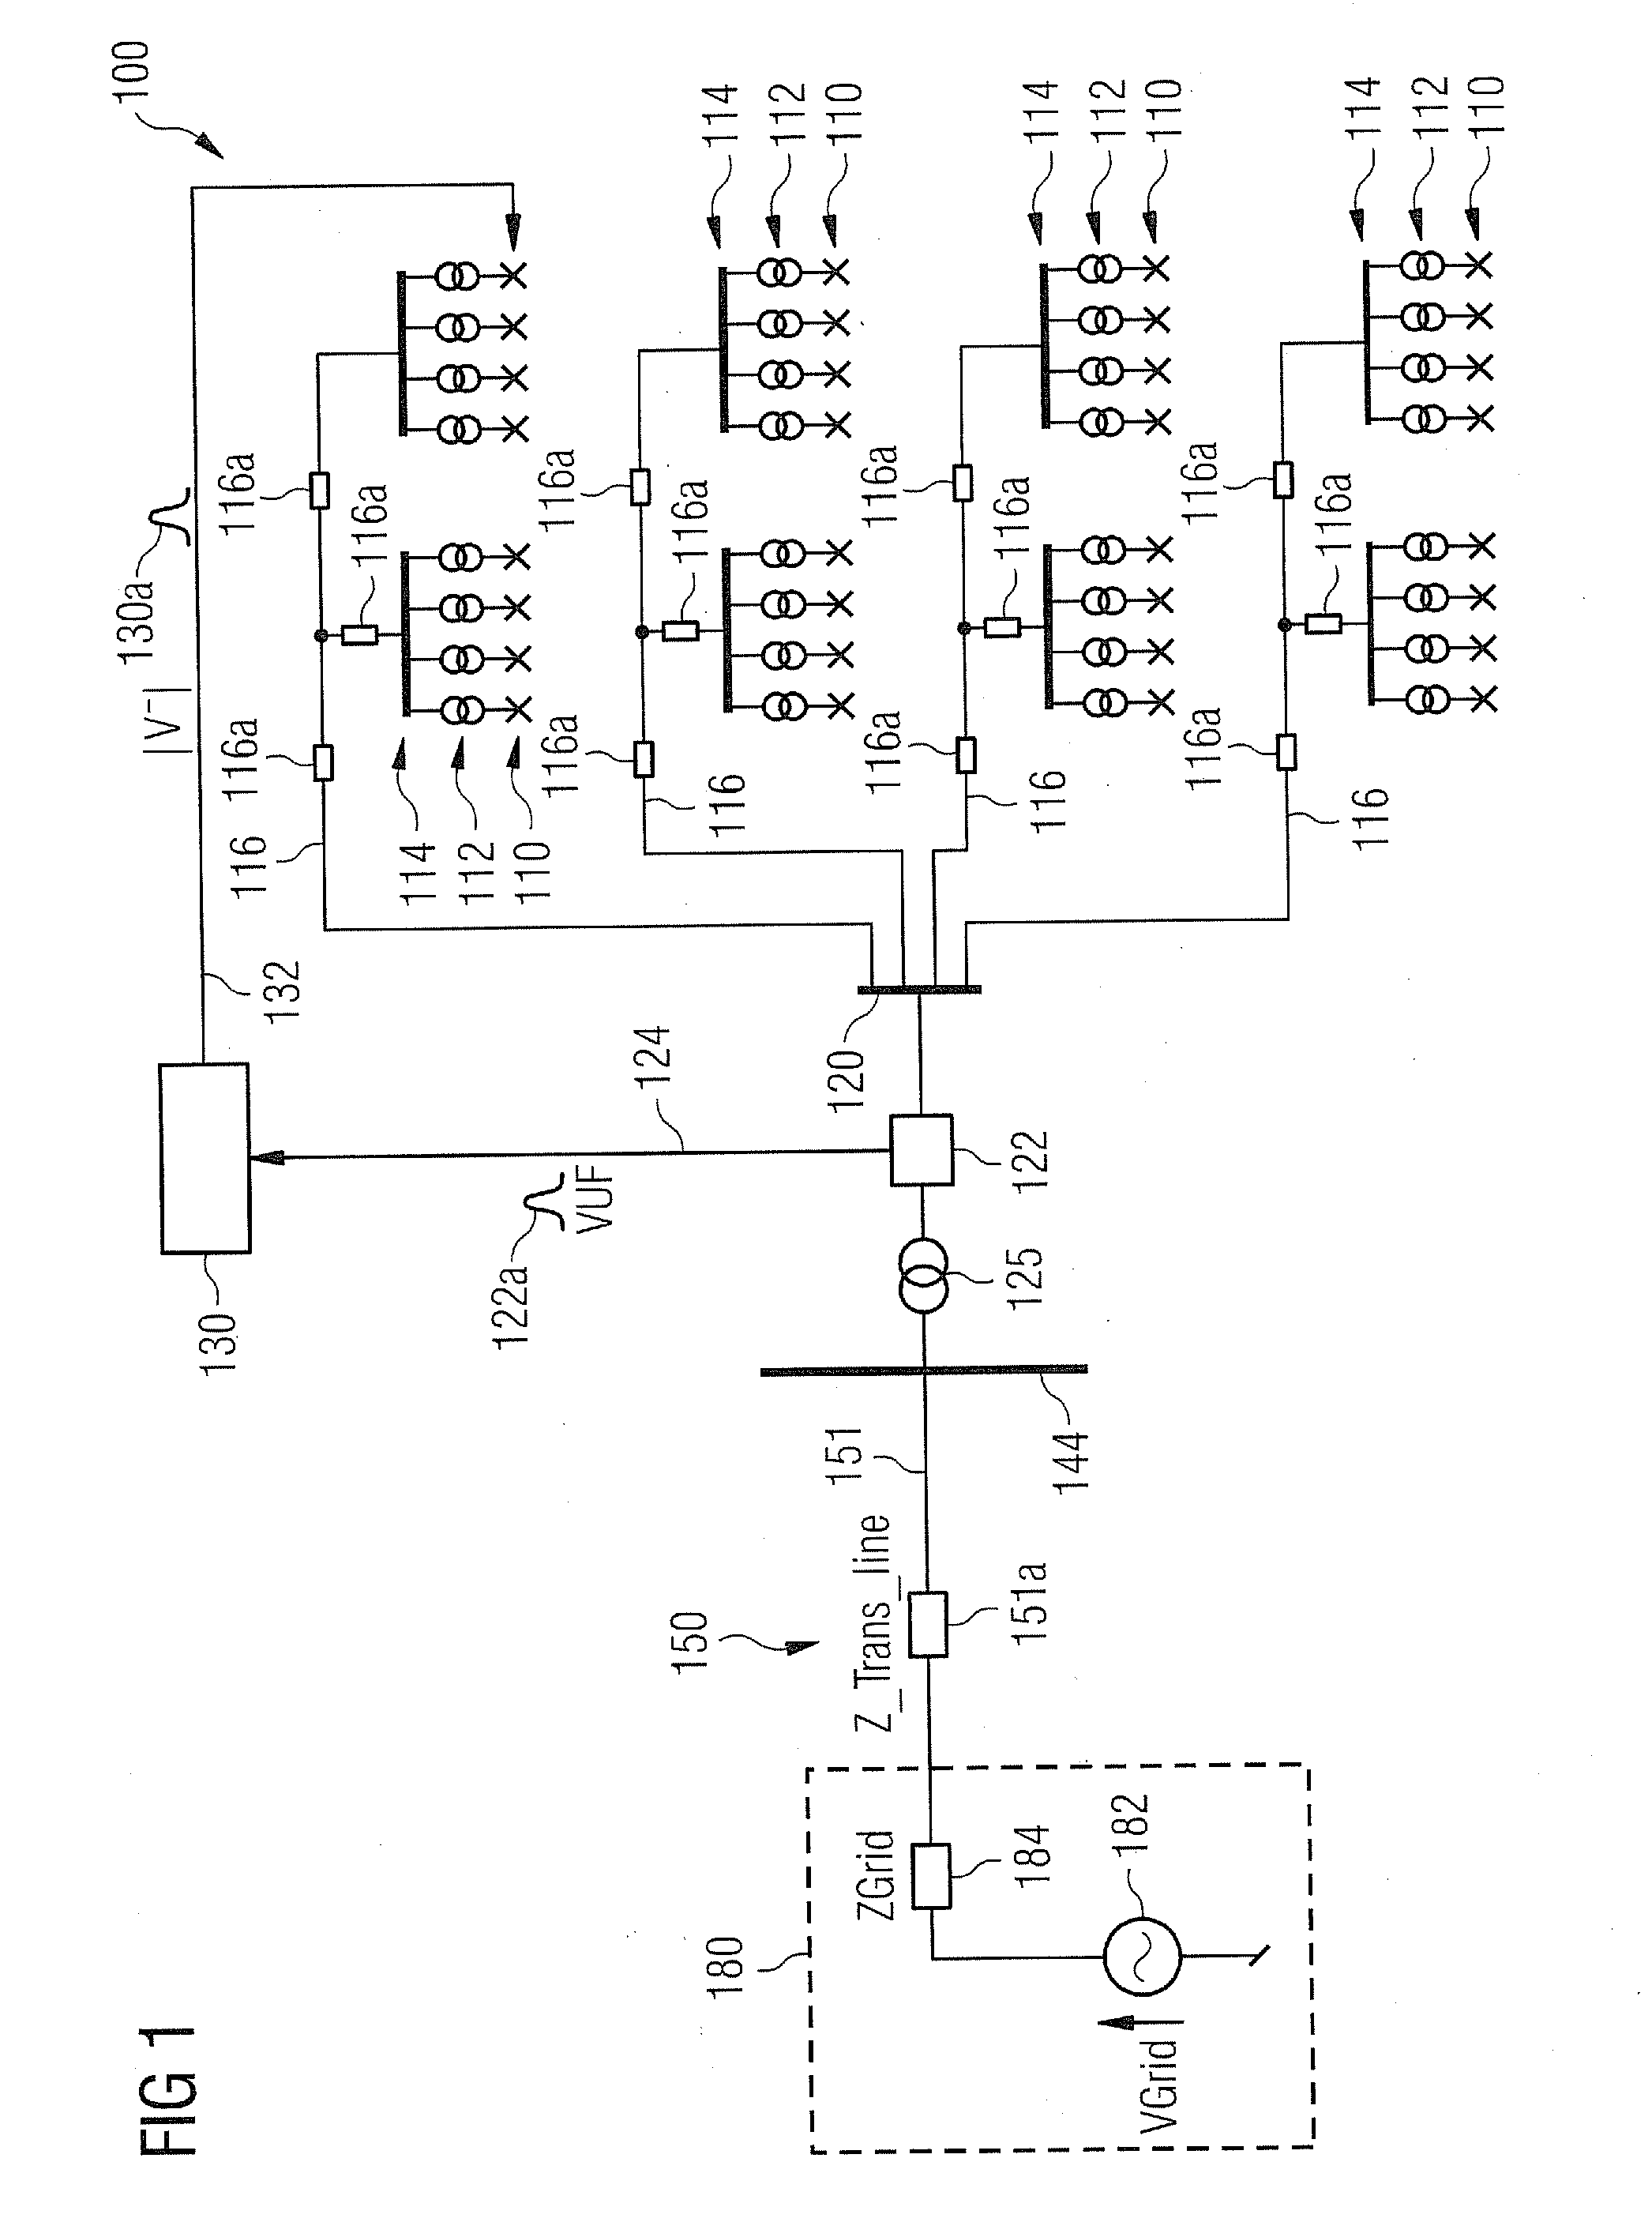 System and method for mitigating an electric unbalance of a three-phase current at a point of common coupling between a wind farm and a power grid